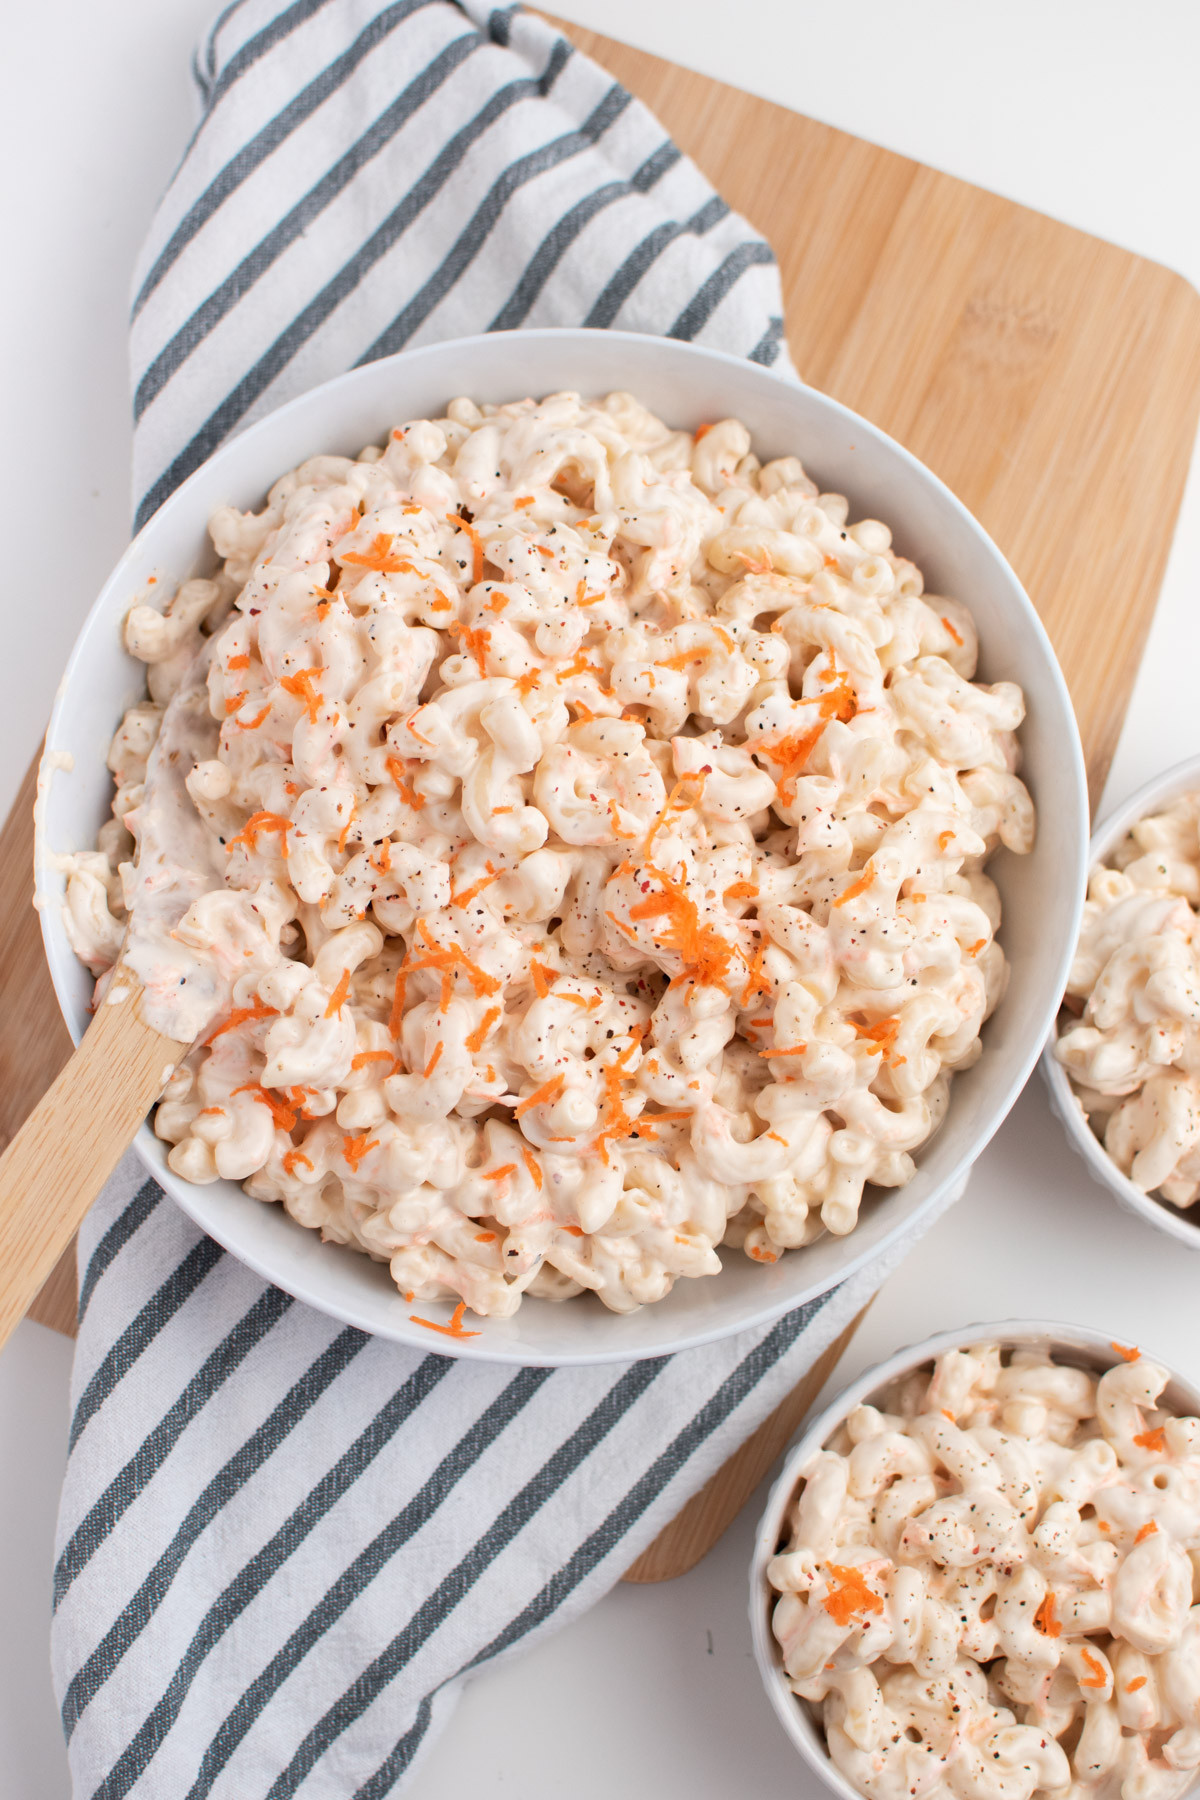 Bowl of Hawaiian macaroni salad with carrots on wooden cutting board next to kitchen towel.